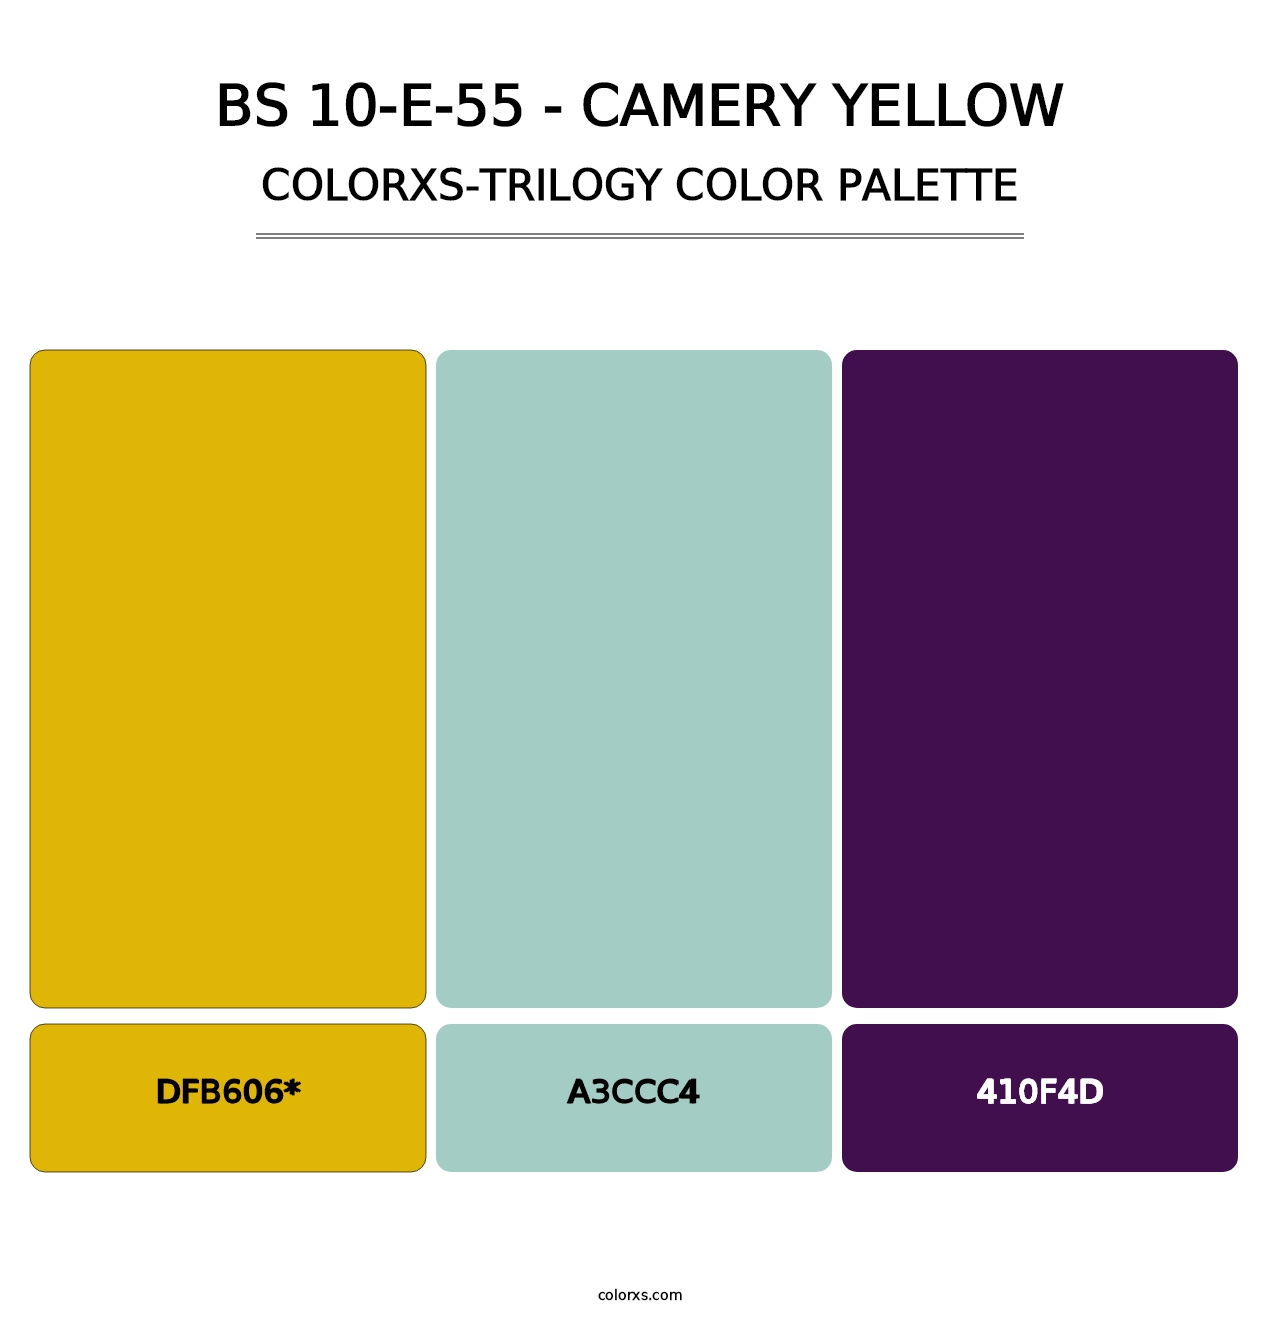 BS 10-E-55 - Camery Yellow - Colorxs Trilogy Palette